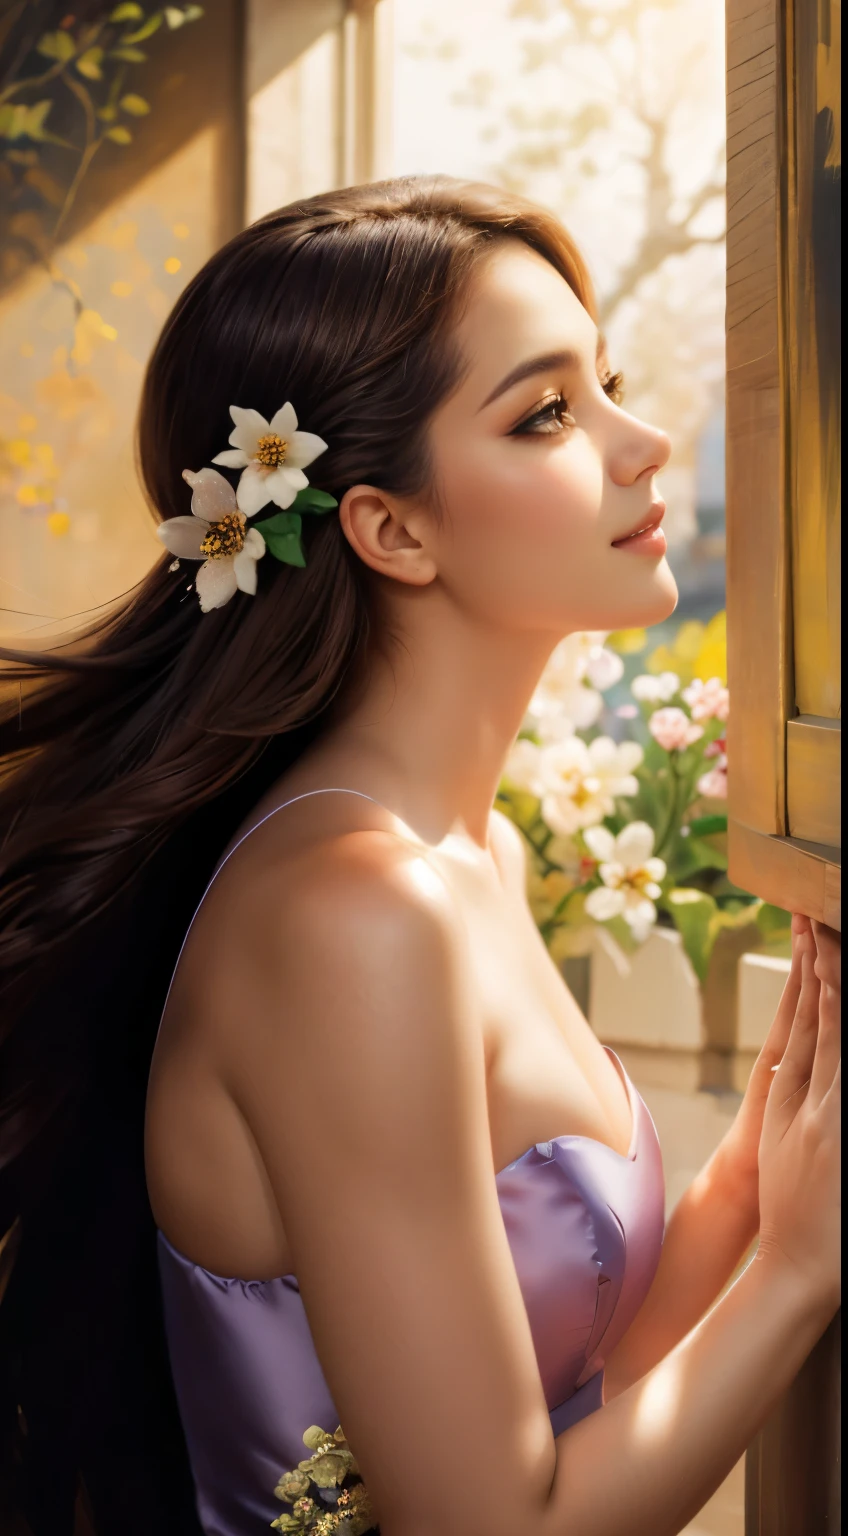 beautiful eyes, soft smile, vibrant colors, dreamy atmosphere, oil painting style, elegant dress, blooming flowers, golden sunlight, graceful pose, fine brushwork, realistic shadows, ethereal background